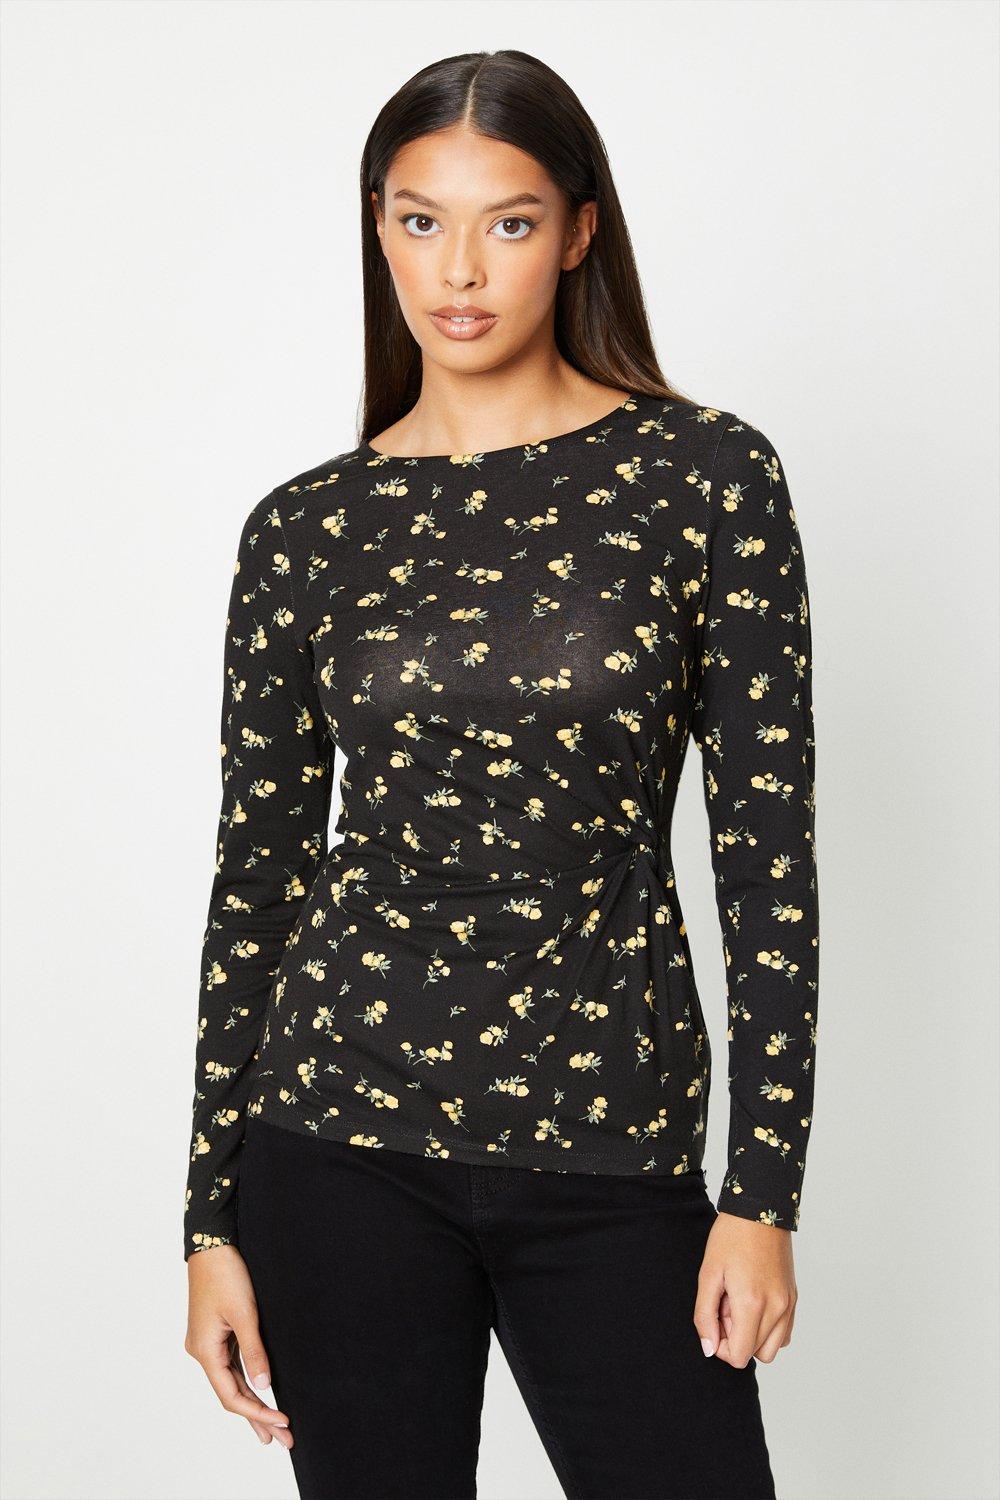 Women's Side Knot Detail Long Sleeve Top - floral - S